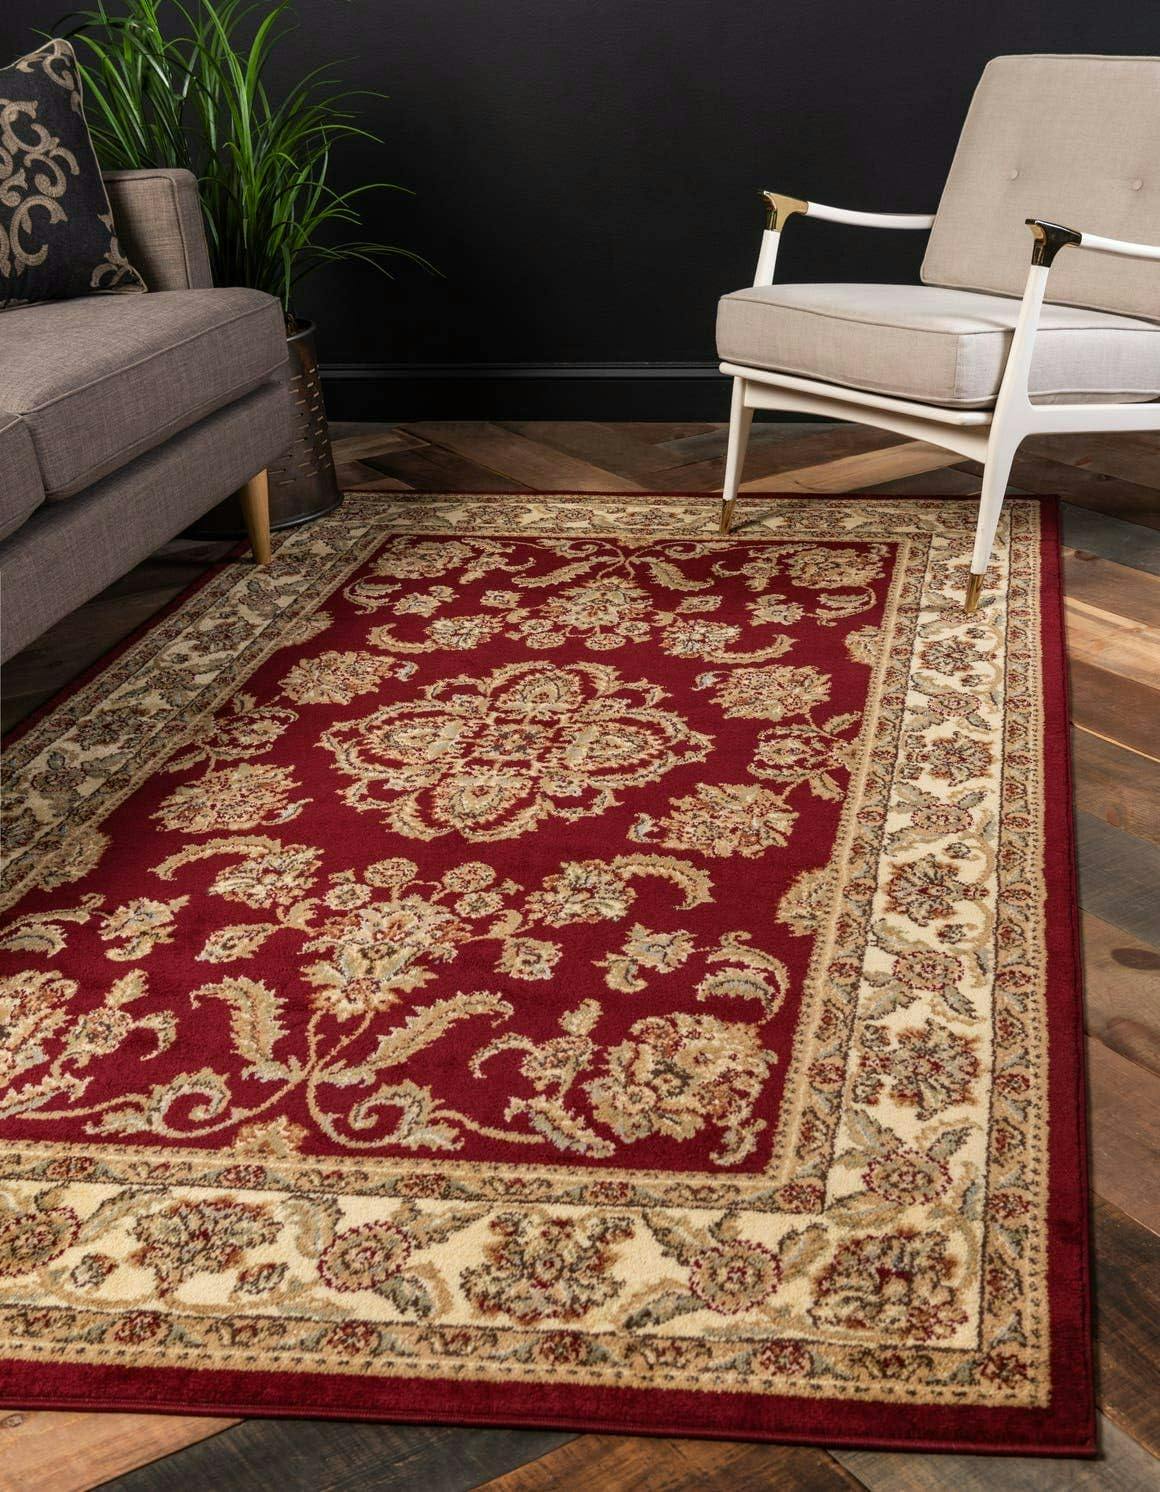 Elegant Voyage 9' x 12' Red Rectangular Easy-Care Synthetic Rug